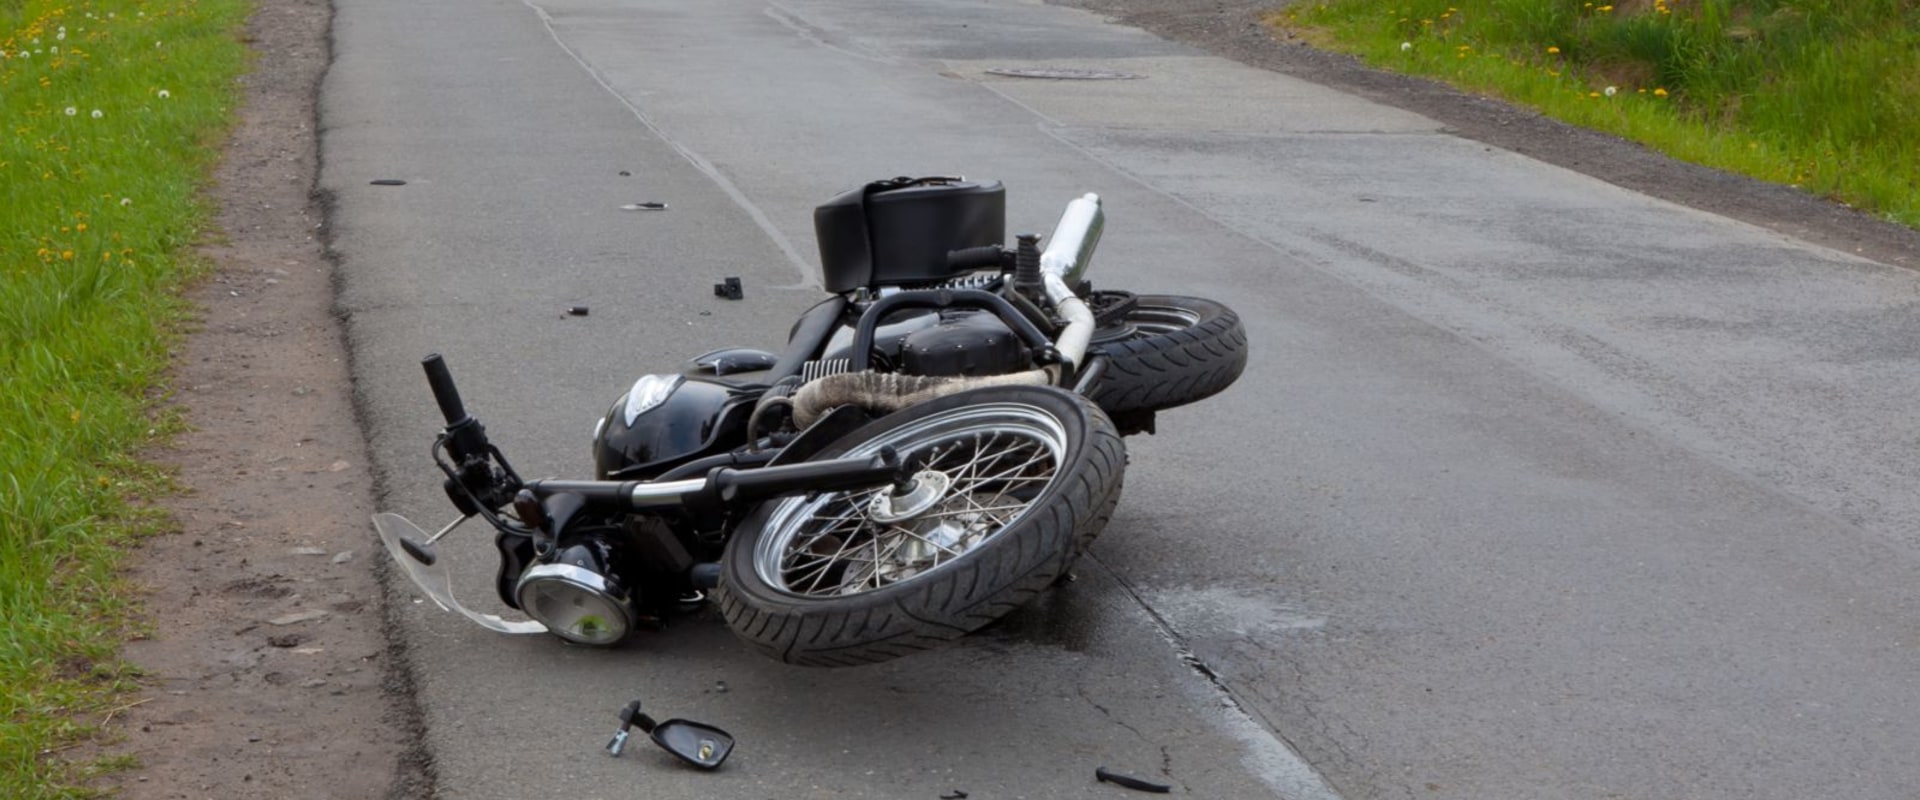 Can you get ptsd from a motorcycle accident?